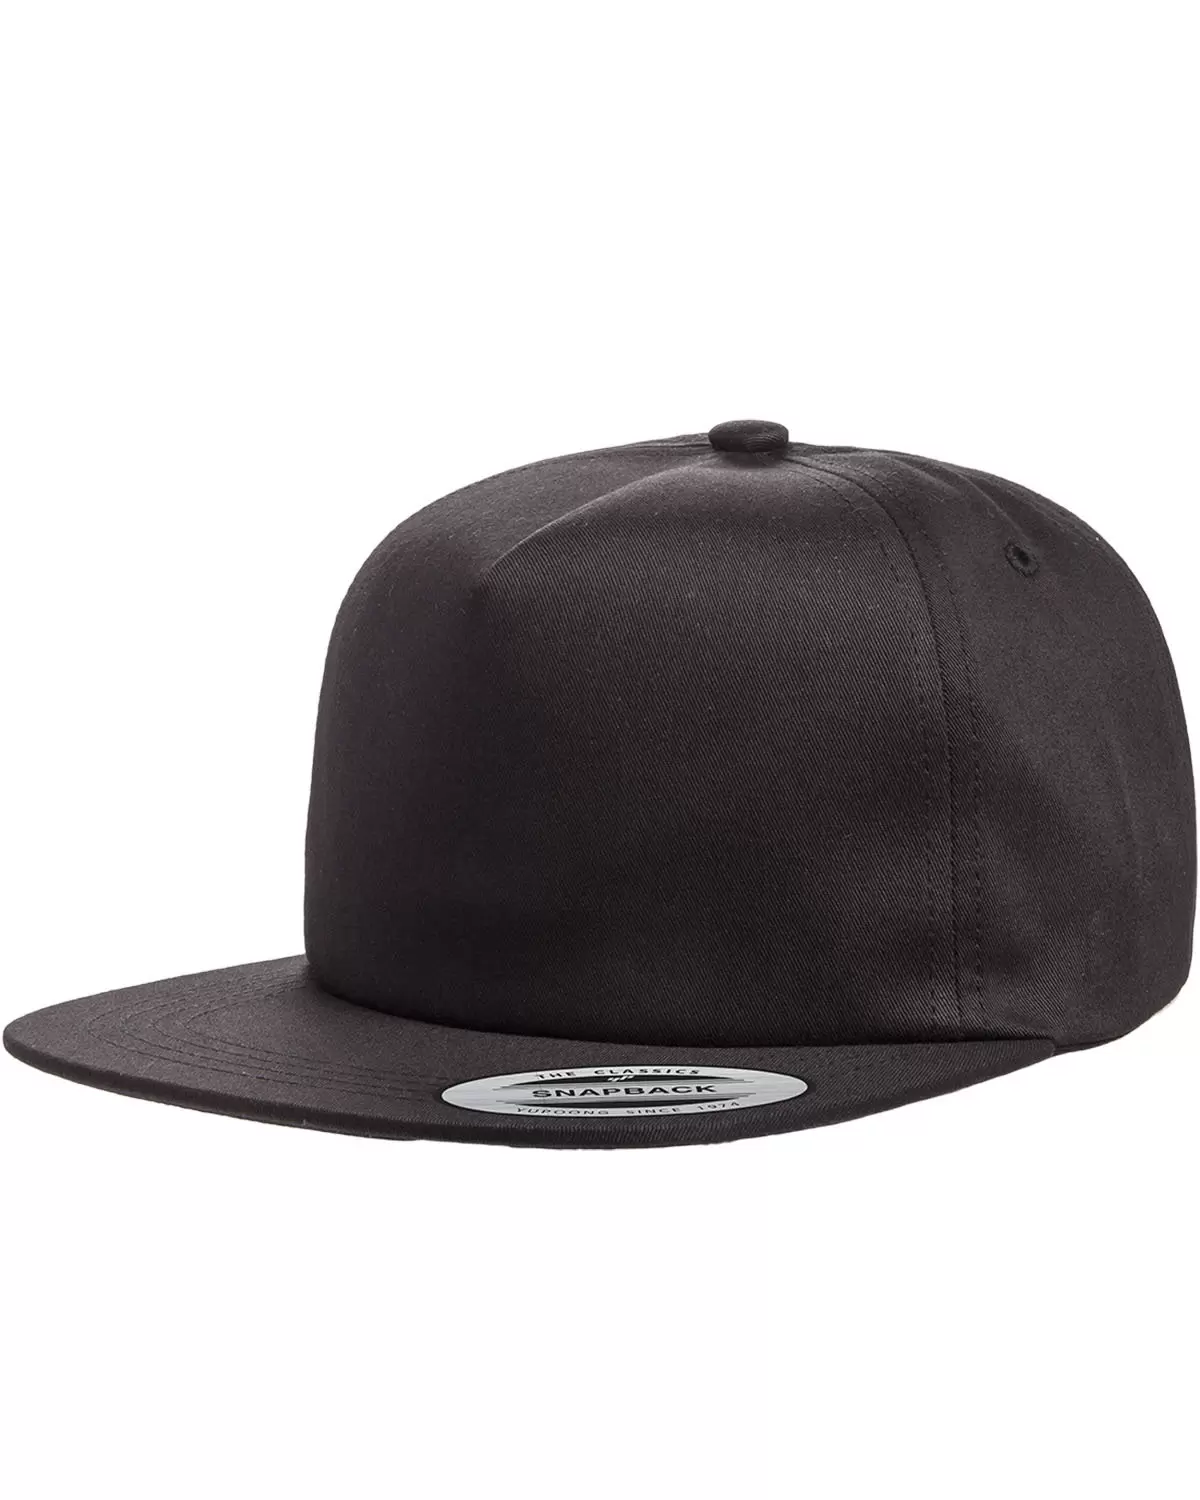 From Unstructured Snapback - 6502 Yupoong-Flex Five-Panel Fit Cap